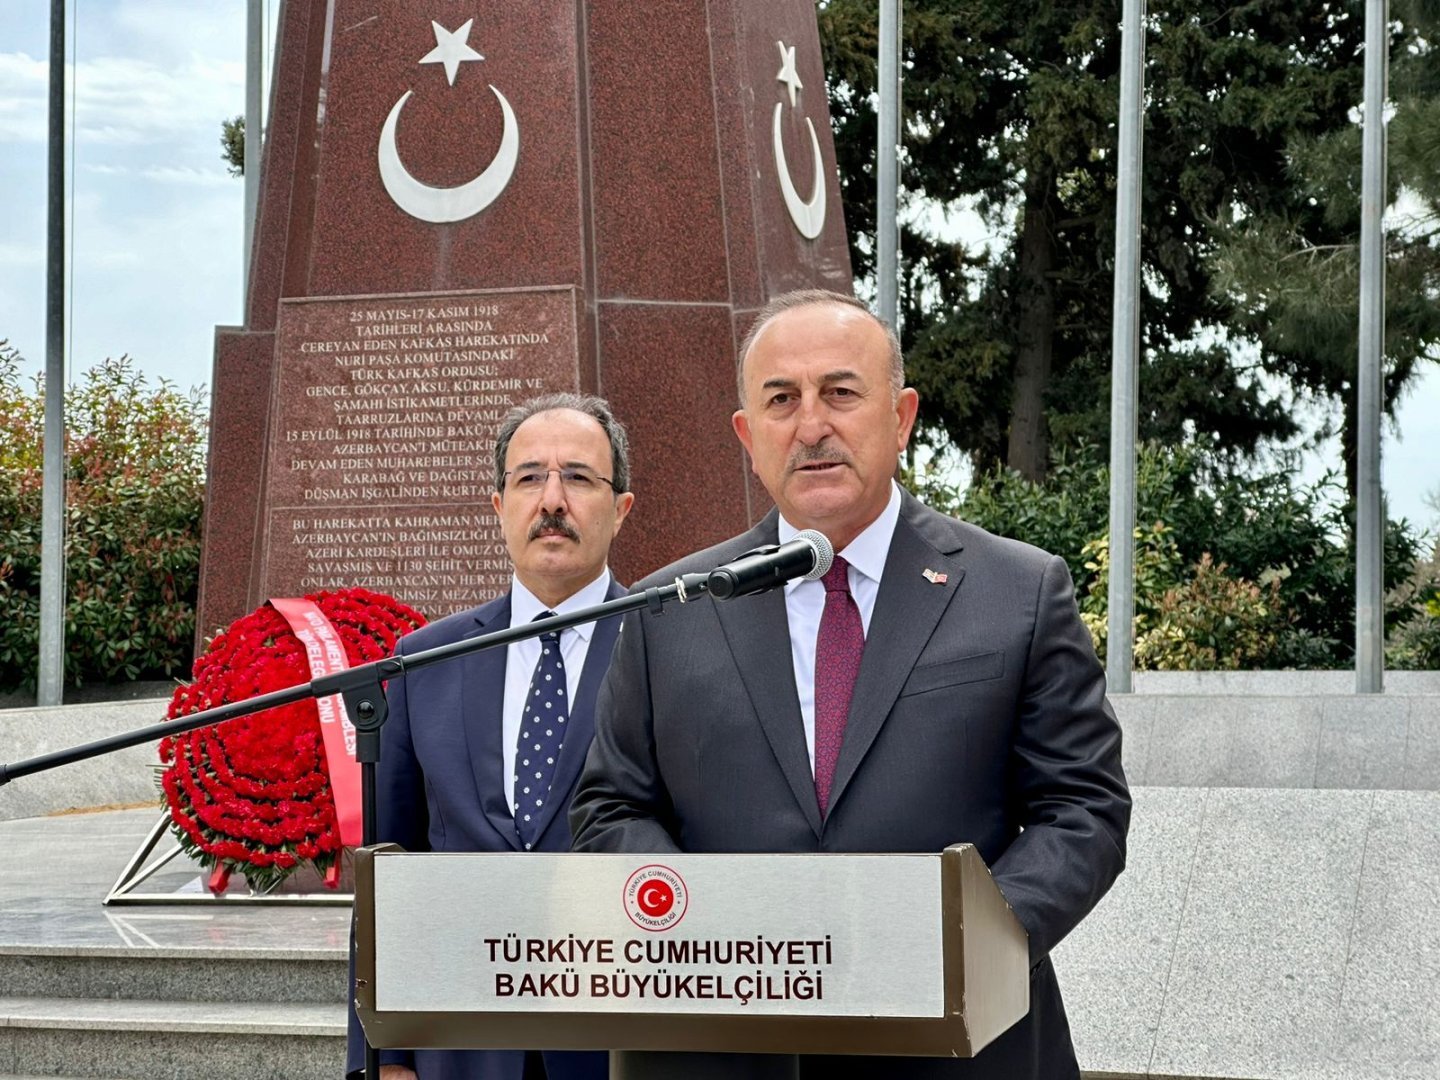 Signing of peace treaty between Azerbaijan and Armenia stands mandatory - Turkish official